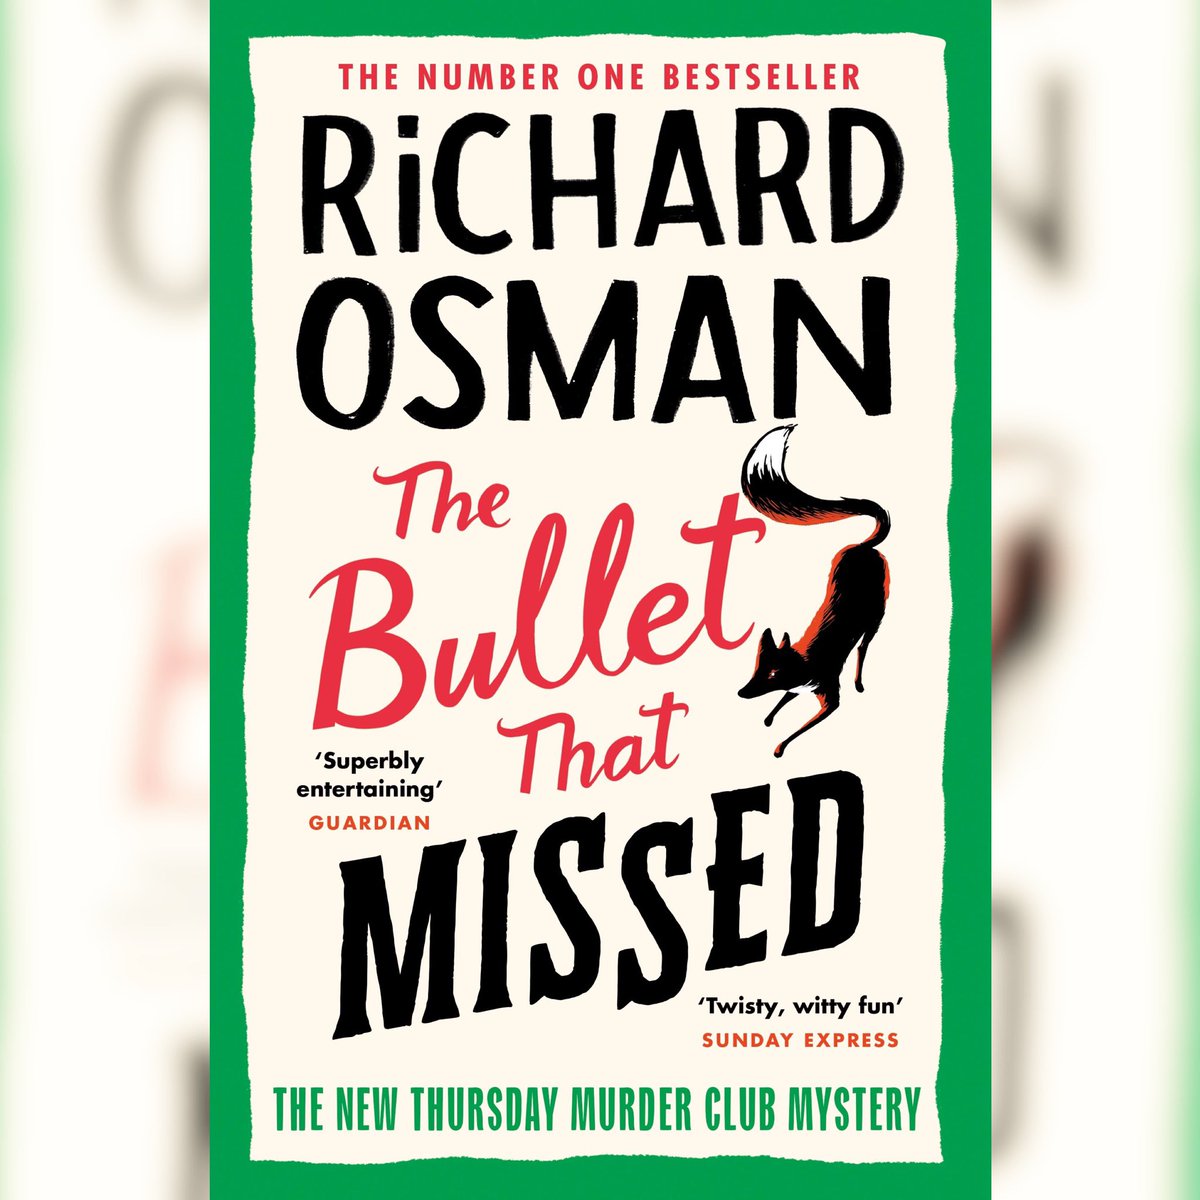 The latest review of the 3rd Thursday Murder Club book, The Bullet That Missed! betweenthepages4.wordpress.com/2023/06/09/the…  #thursdaymurderclub #richardosman #thursdaymurderclubrichardosman #thebulletthatmissed #bookreview